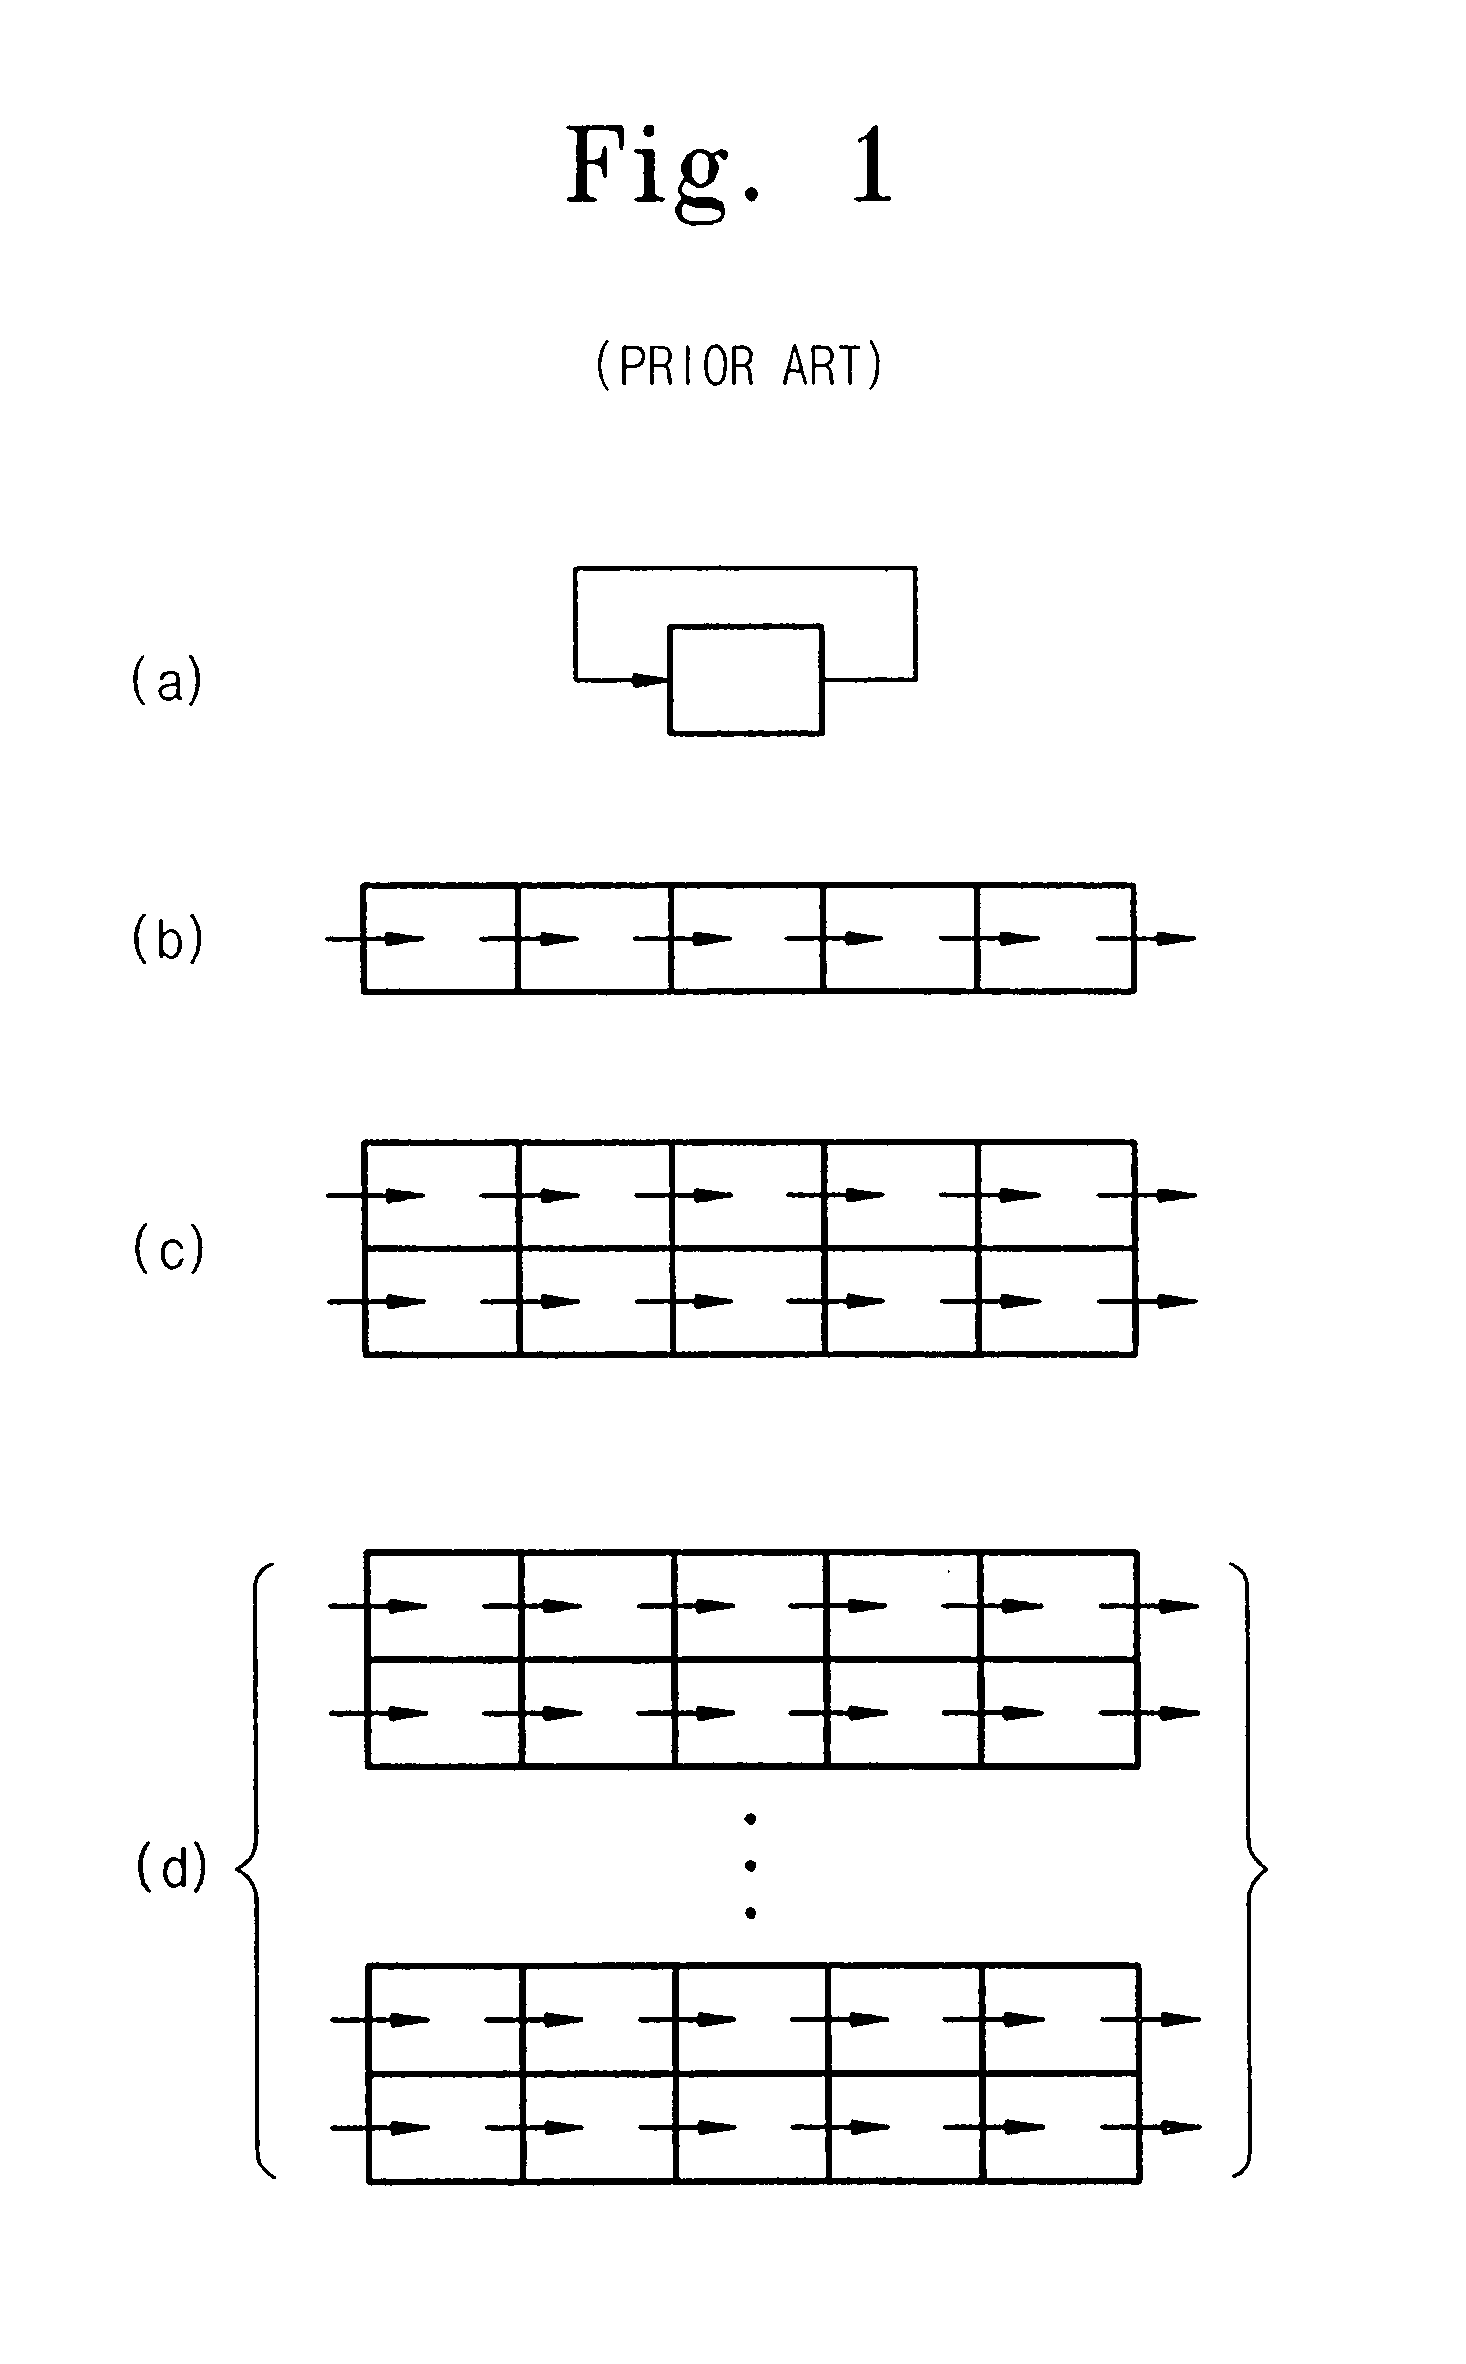 Method of an address trace cache storing loop control information to conserve trace cache area